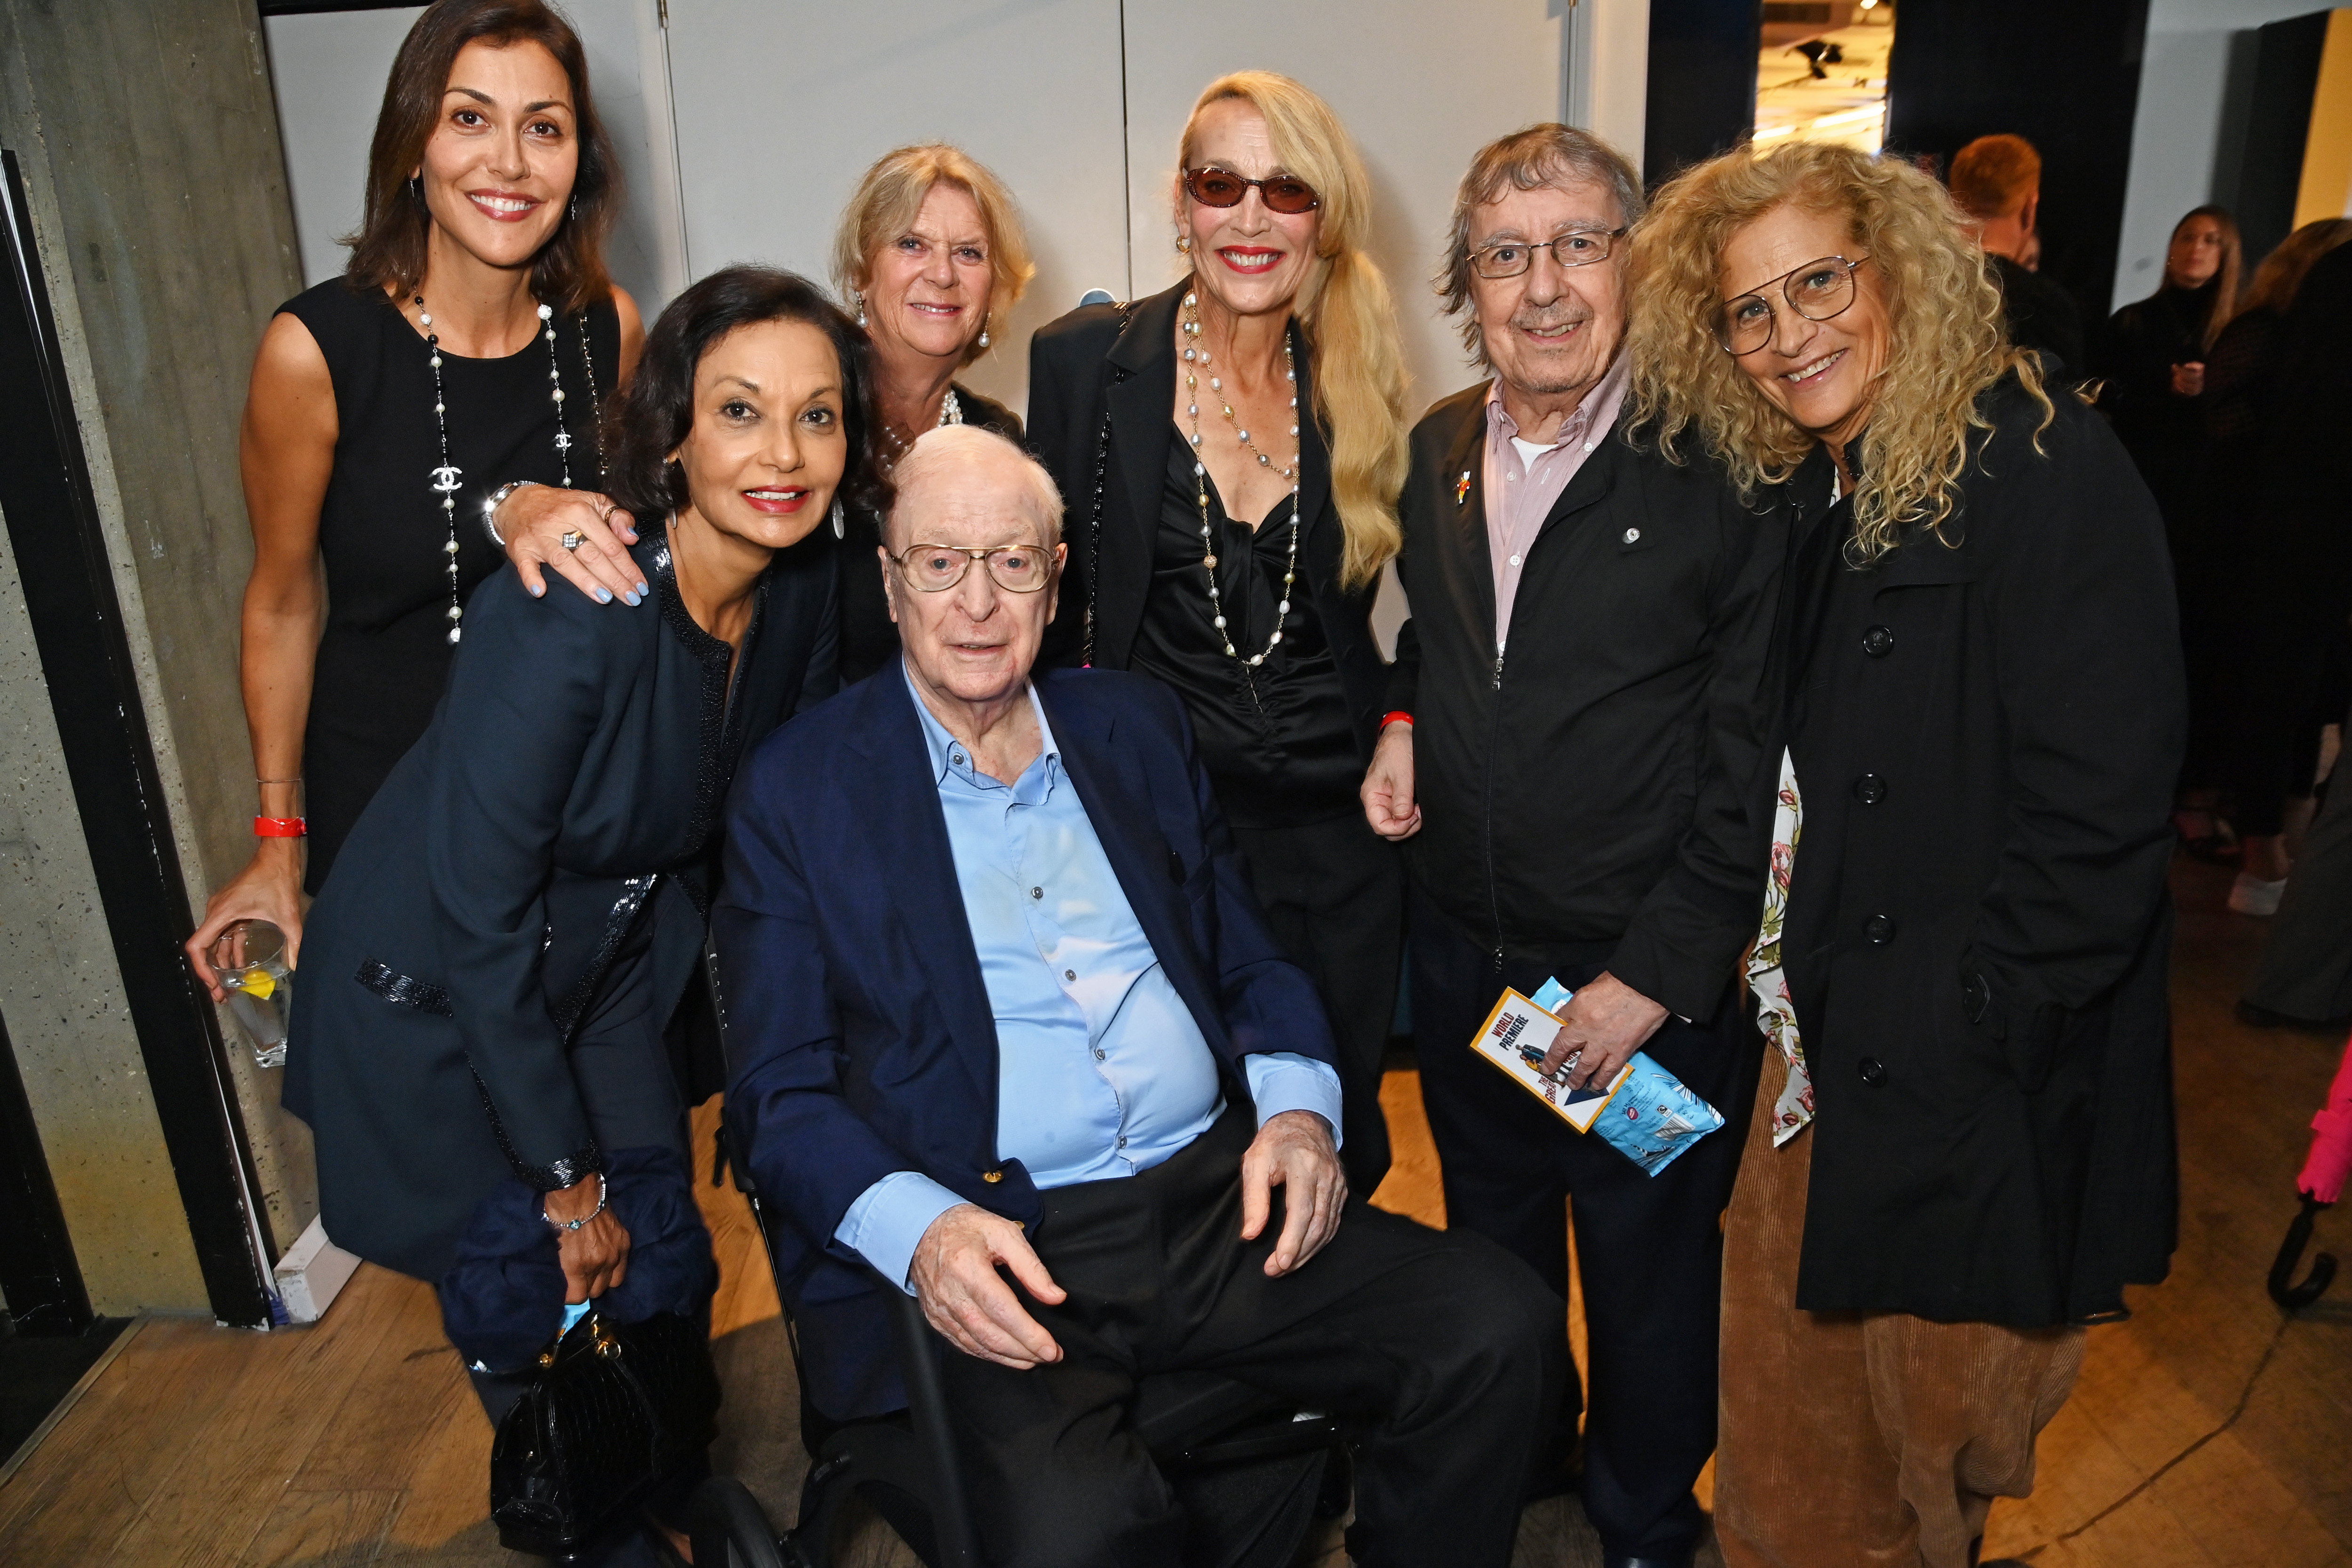 (L to R) Natasha Caine, Shakira Caine, Nikki Caine, Michael Caine, Jerry Hall, Bill Wyman and Suzanne Wyman at the world premiere of "The Great Escaper," September 2023 | Source: Getty Images